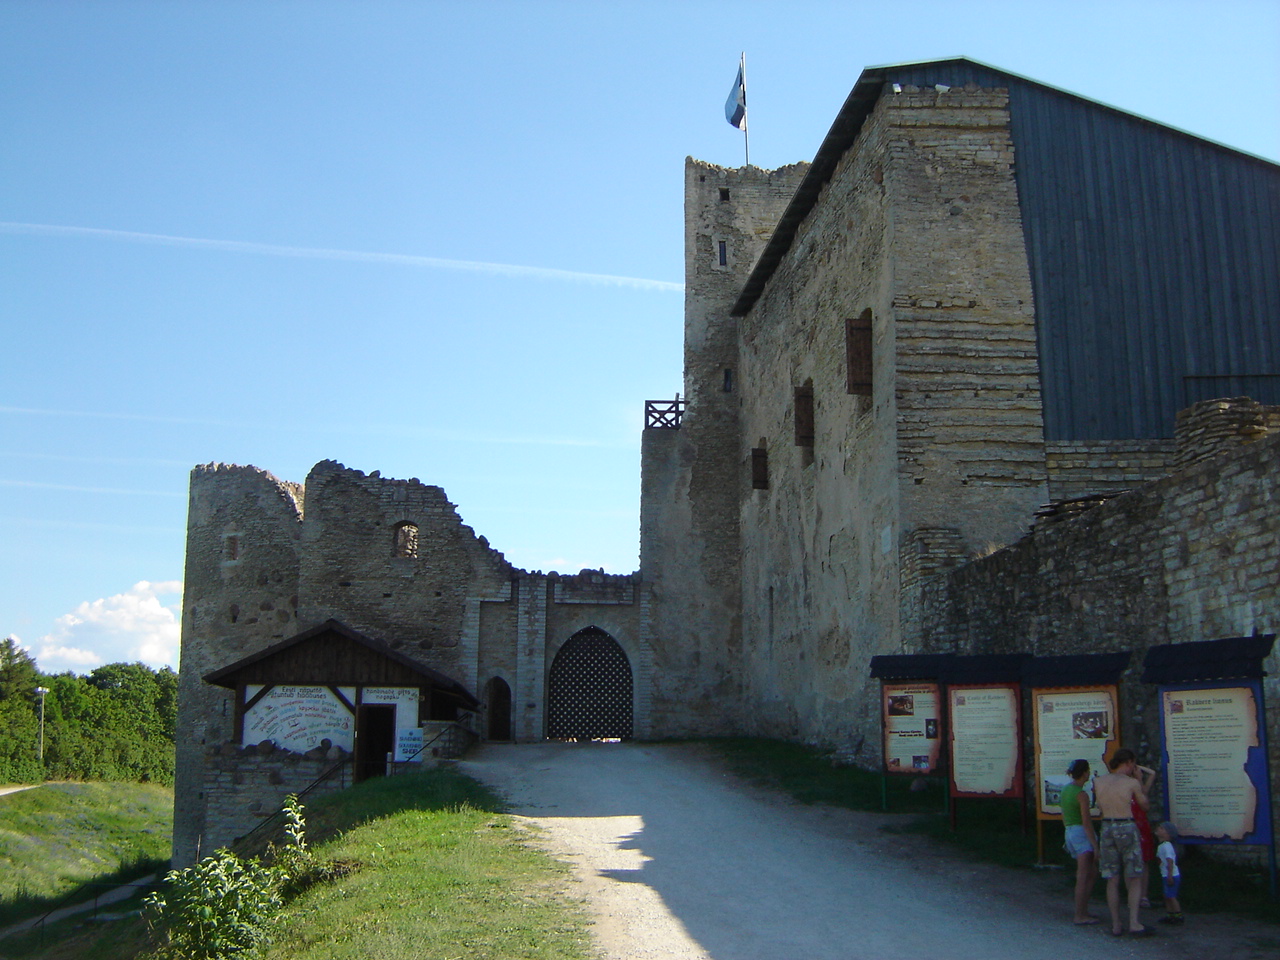 Rakvere Orthodox 3 - the gates of the city, the rondeel or the round artillery tower and the south-east tower.